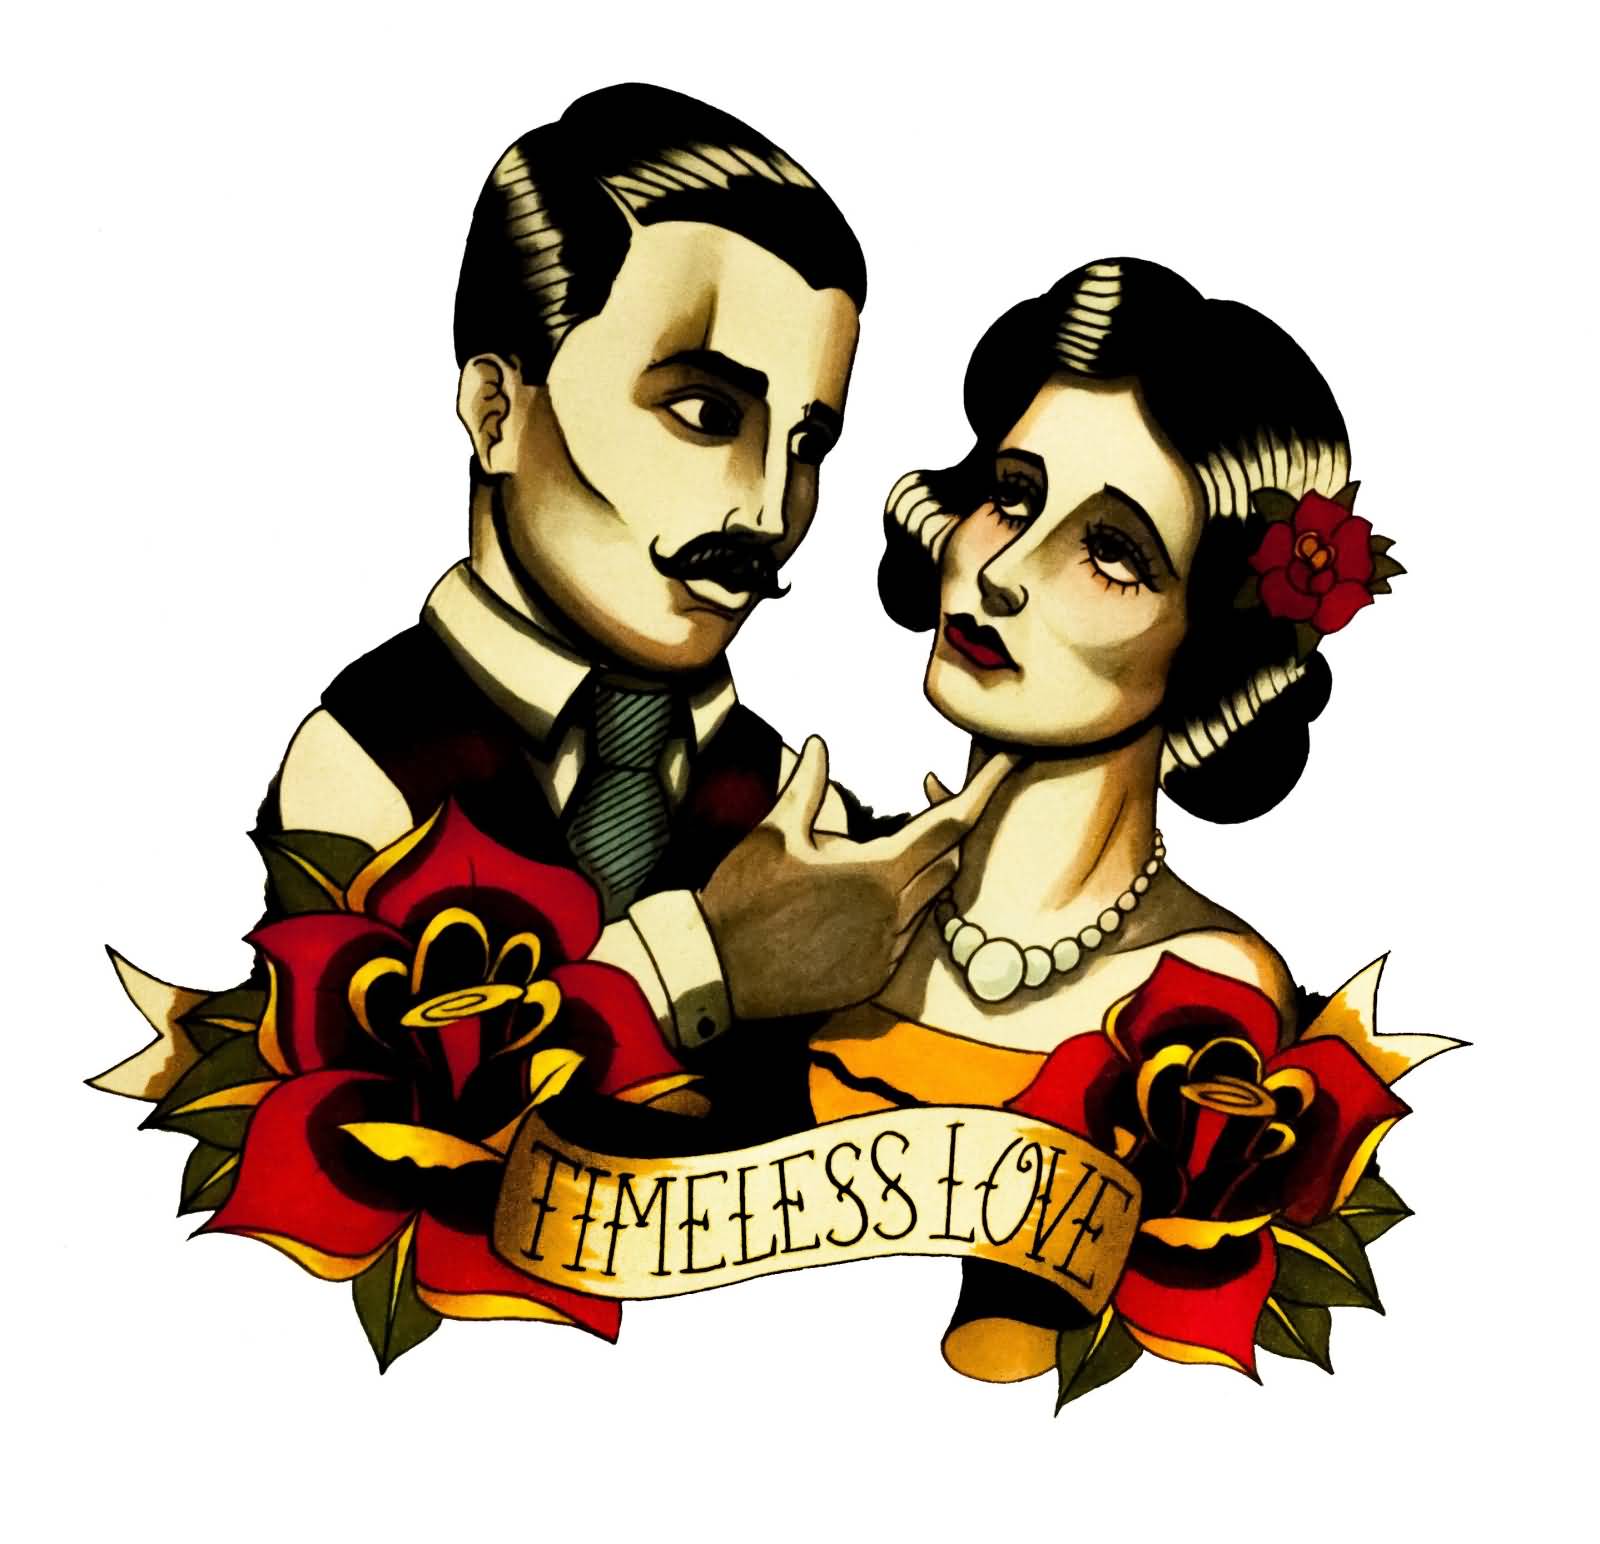 Nice Old School Timeless Love Tattoo Design By TheBrokenPuppet